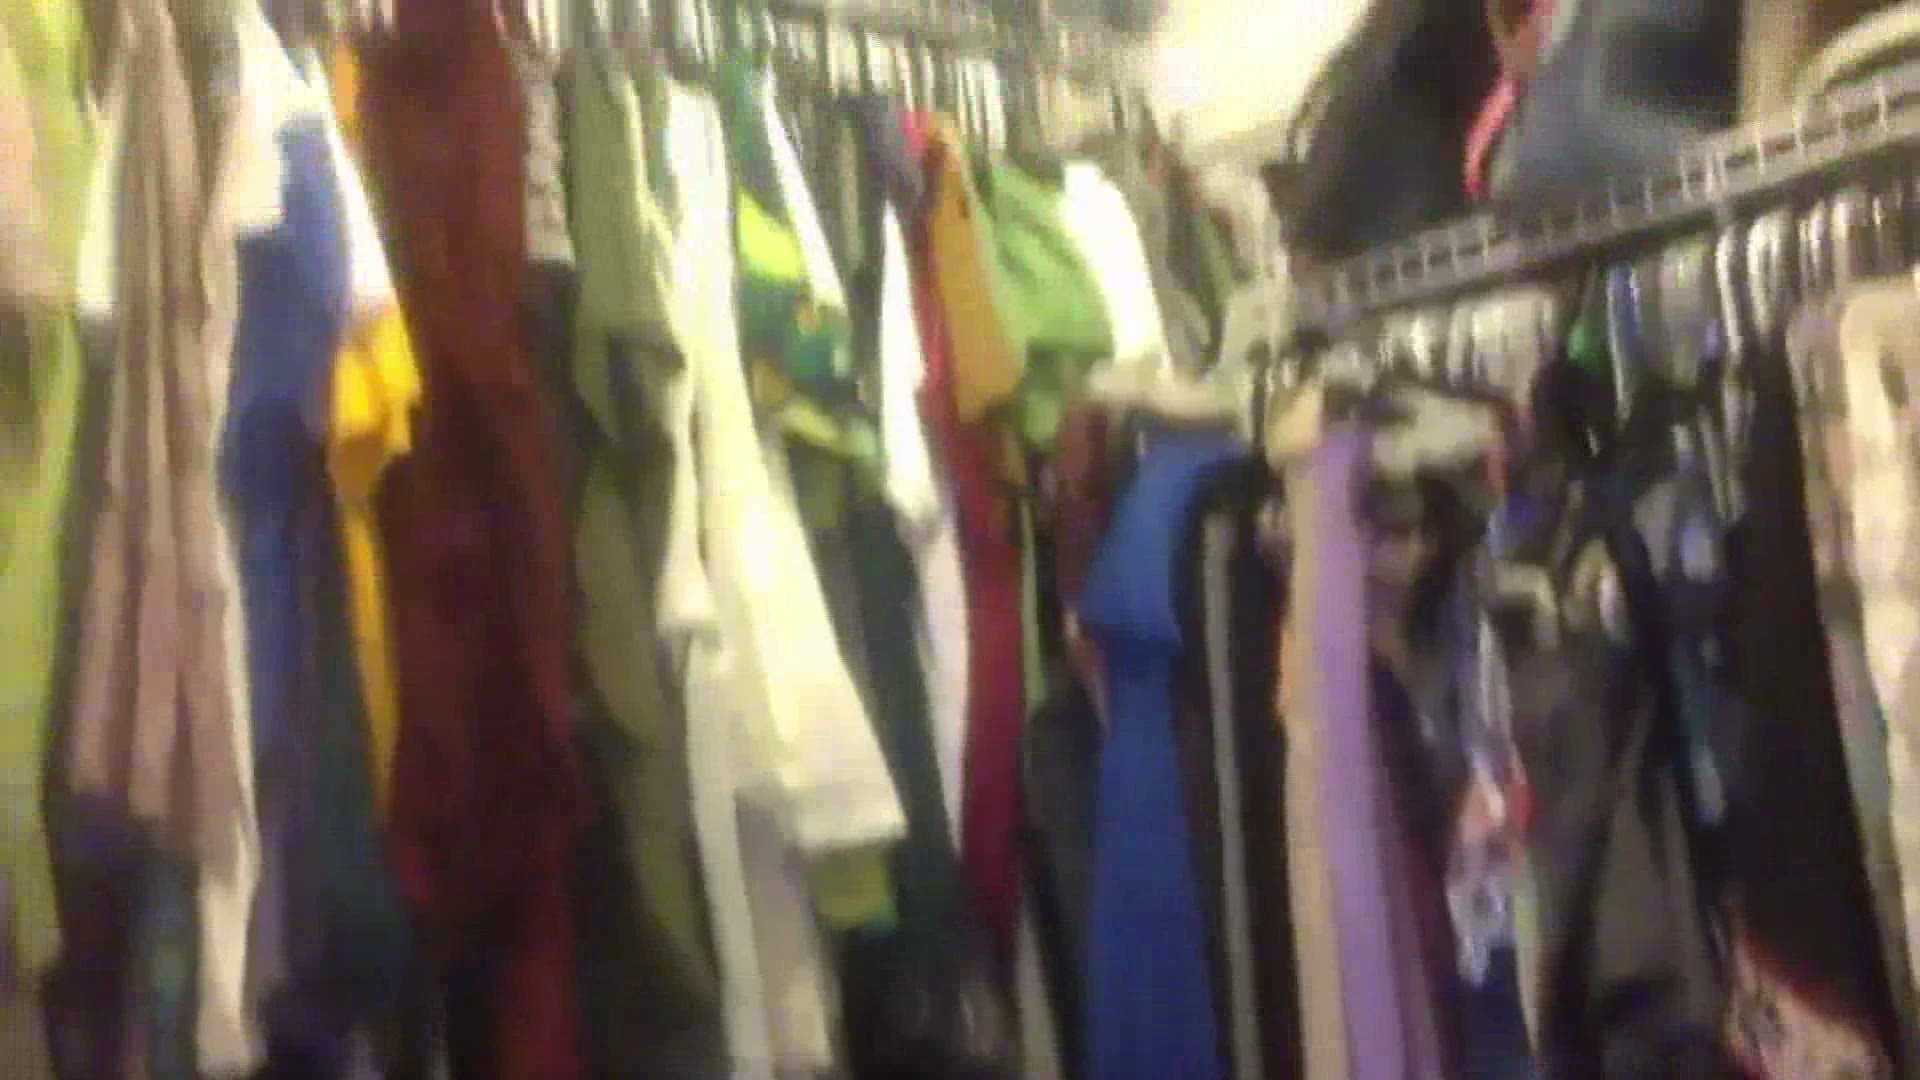 Plato's Closet Customer Calls Out Store for 'Scamming' Her Sale